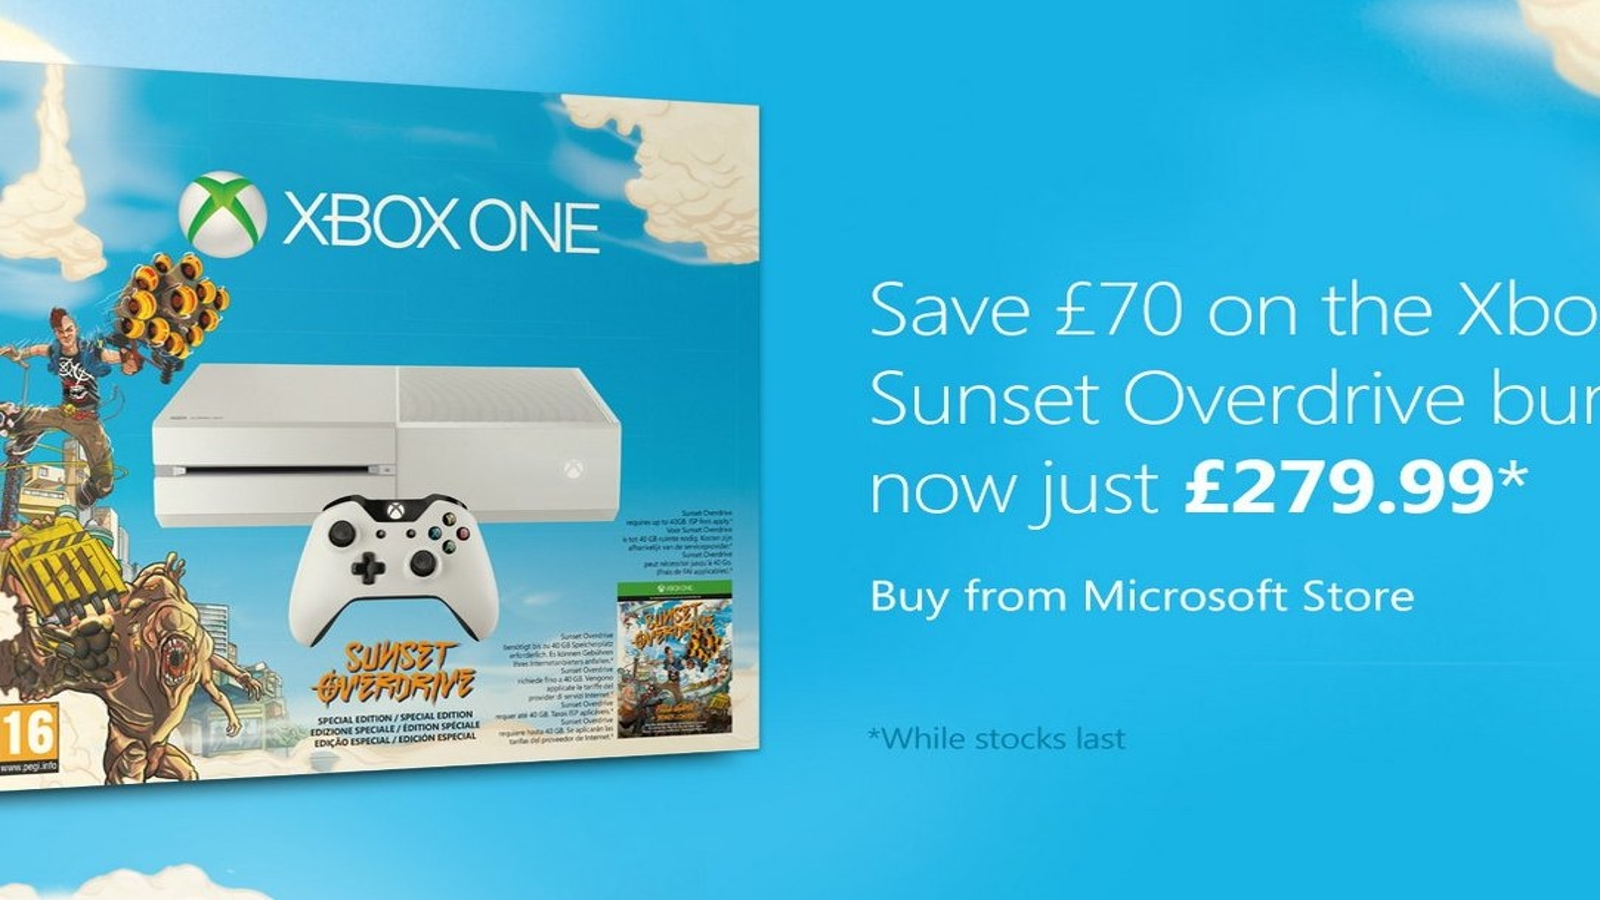 White Xbox One and Sunset Overdrive bundle cut to £279.99